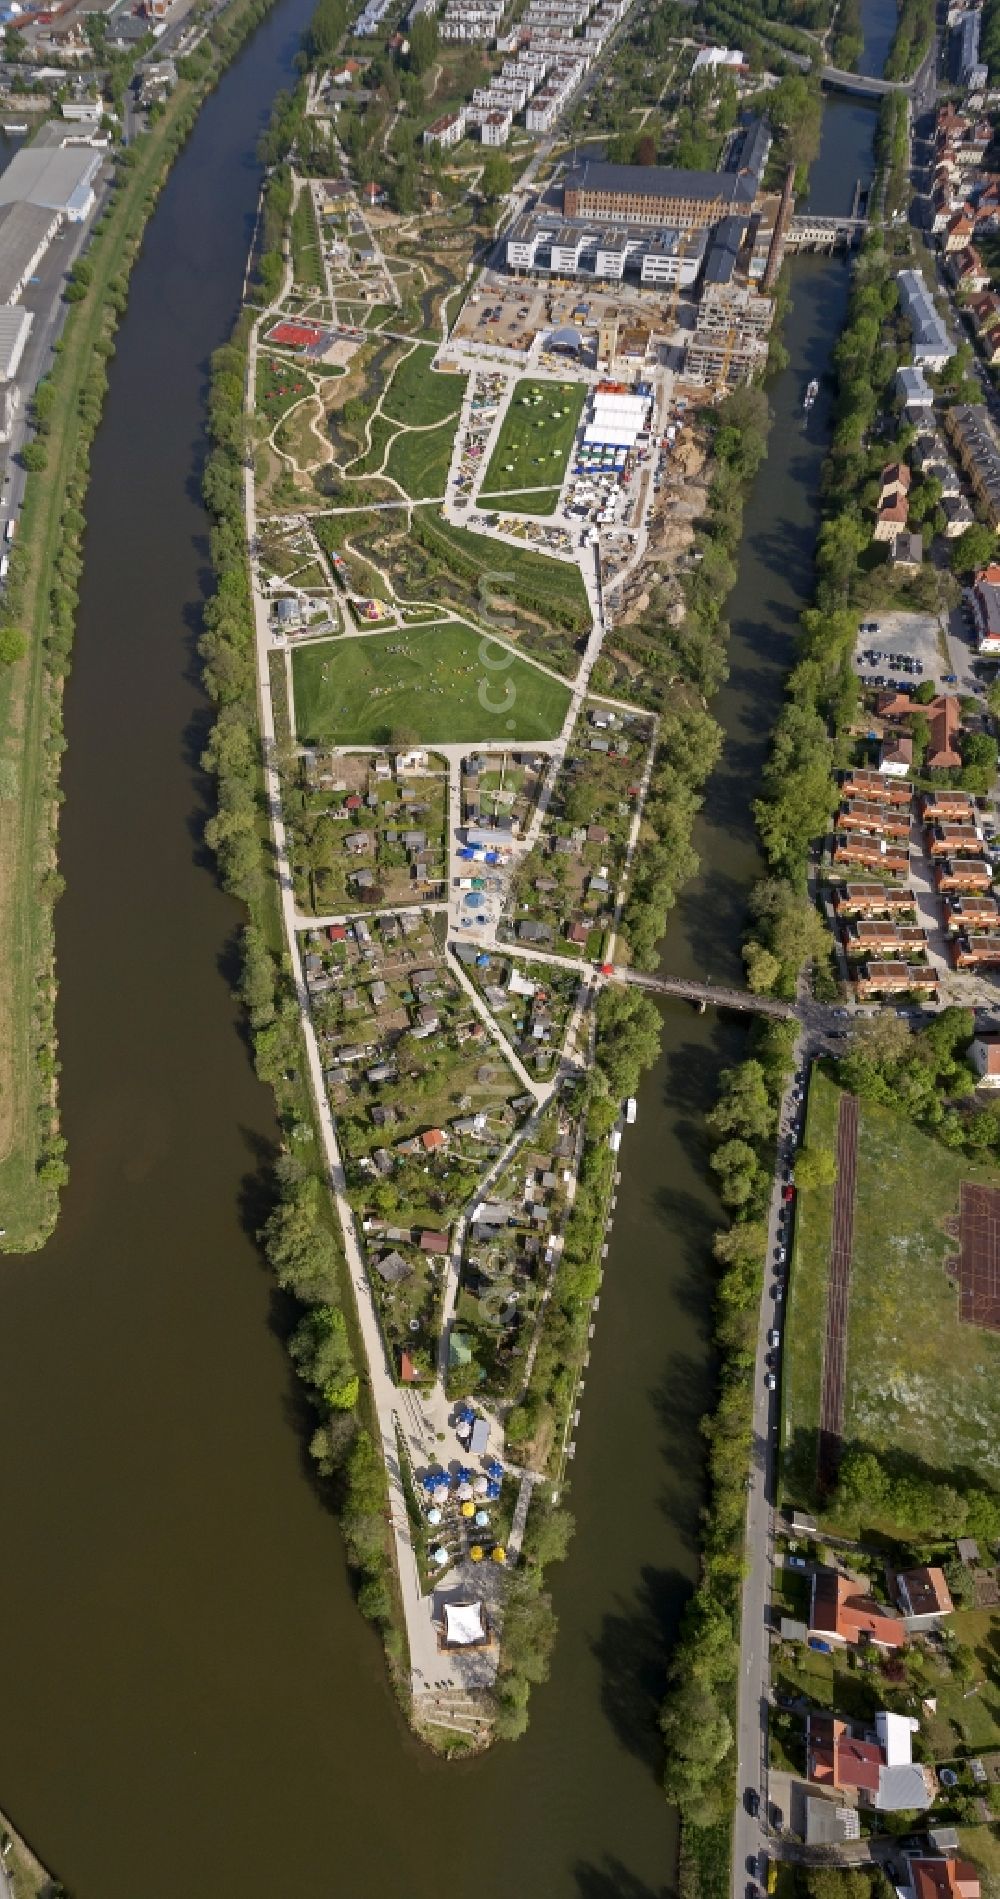 Bamberg from above - View of the horticultural show in the ERBA area in Bamberg in Bavaria. Opened in 2002, the park and recreation area was designed by the landscape architect Hans Brugger. In addition to a fish ladder and the famous pyramid field, the park offers a variety of games and sports fields